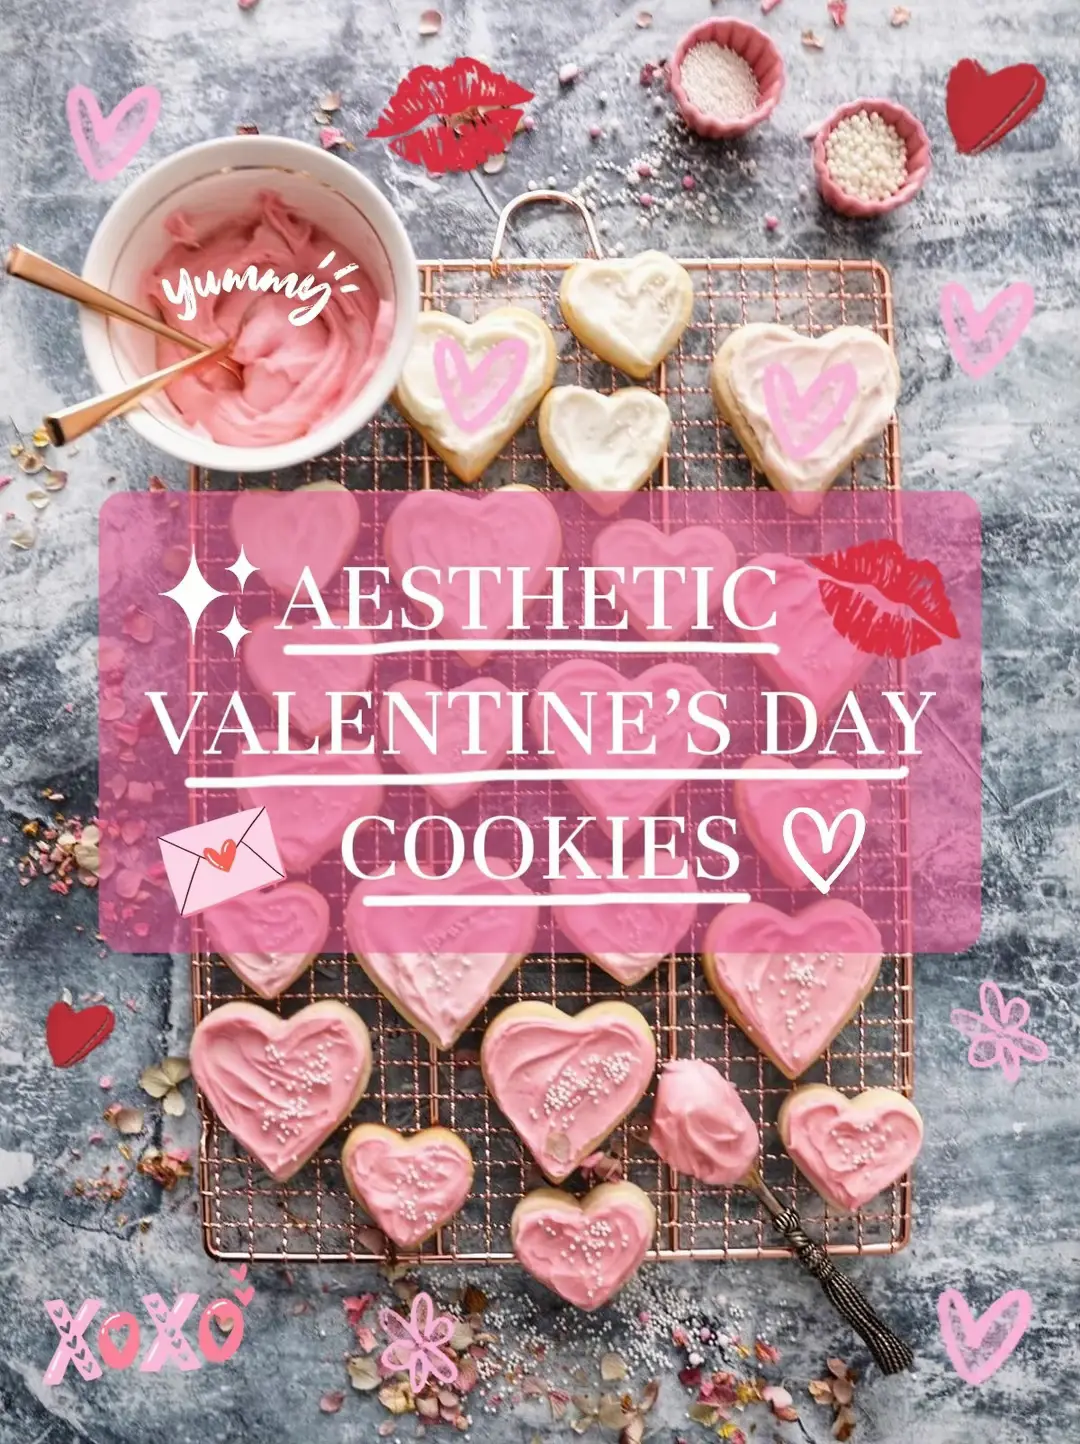 ✨ AESTHETIC 🌹 VALENTINE'S DAY 🌹 COOKIES 🍪😍, Gallery posted by Marcella  ✨